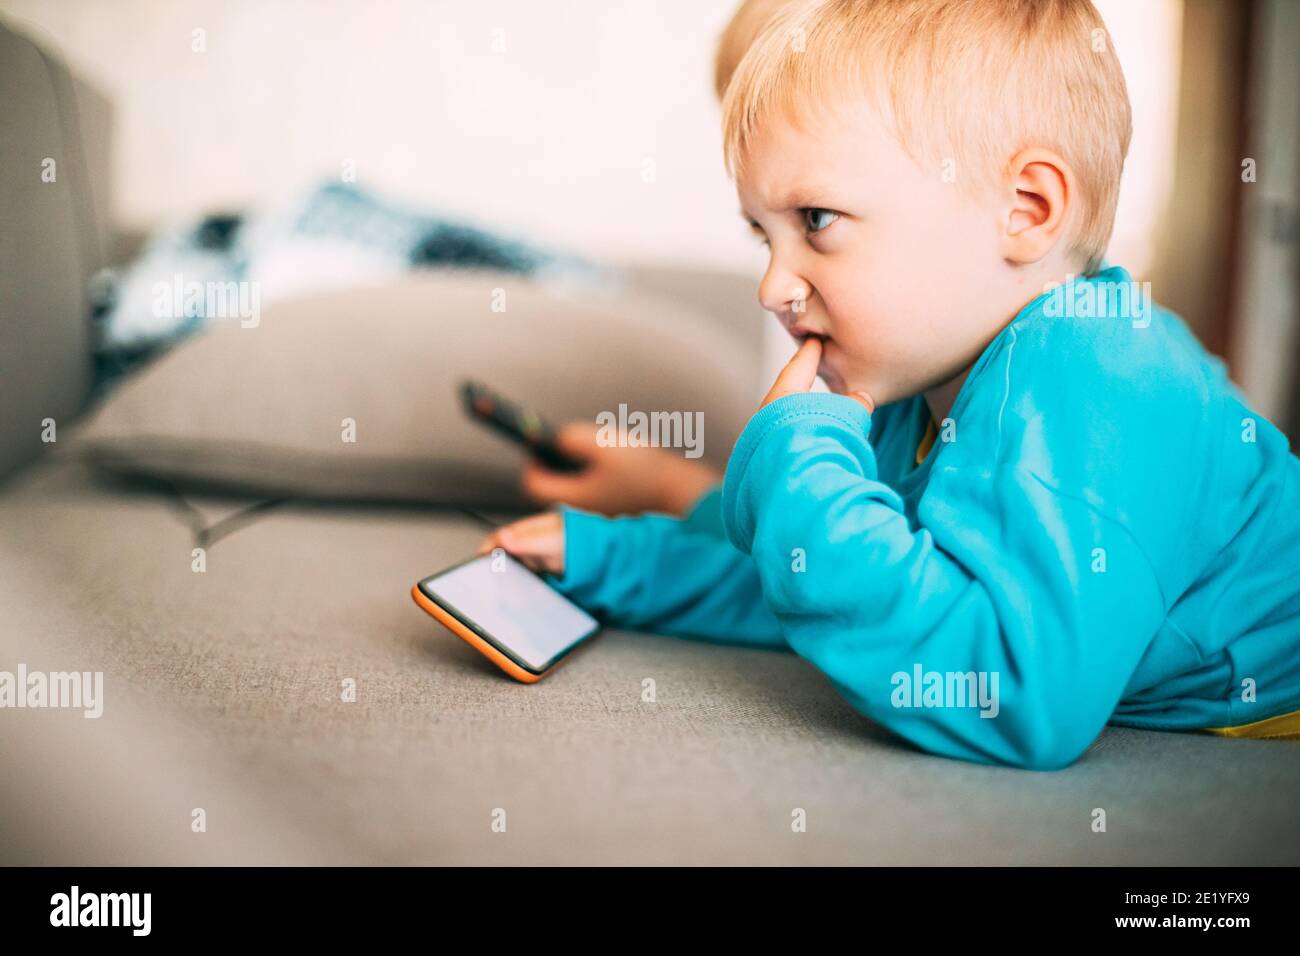 Little Caucasian Boy Playing Games On Phone Thoughtfully Stock Photo